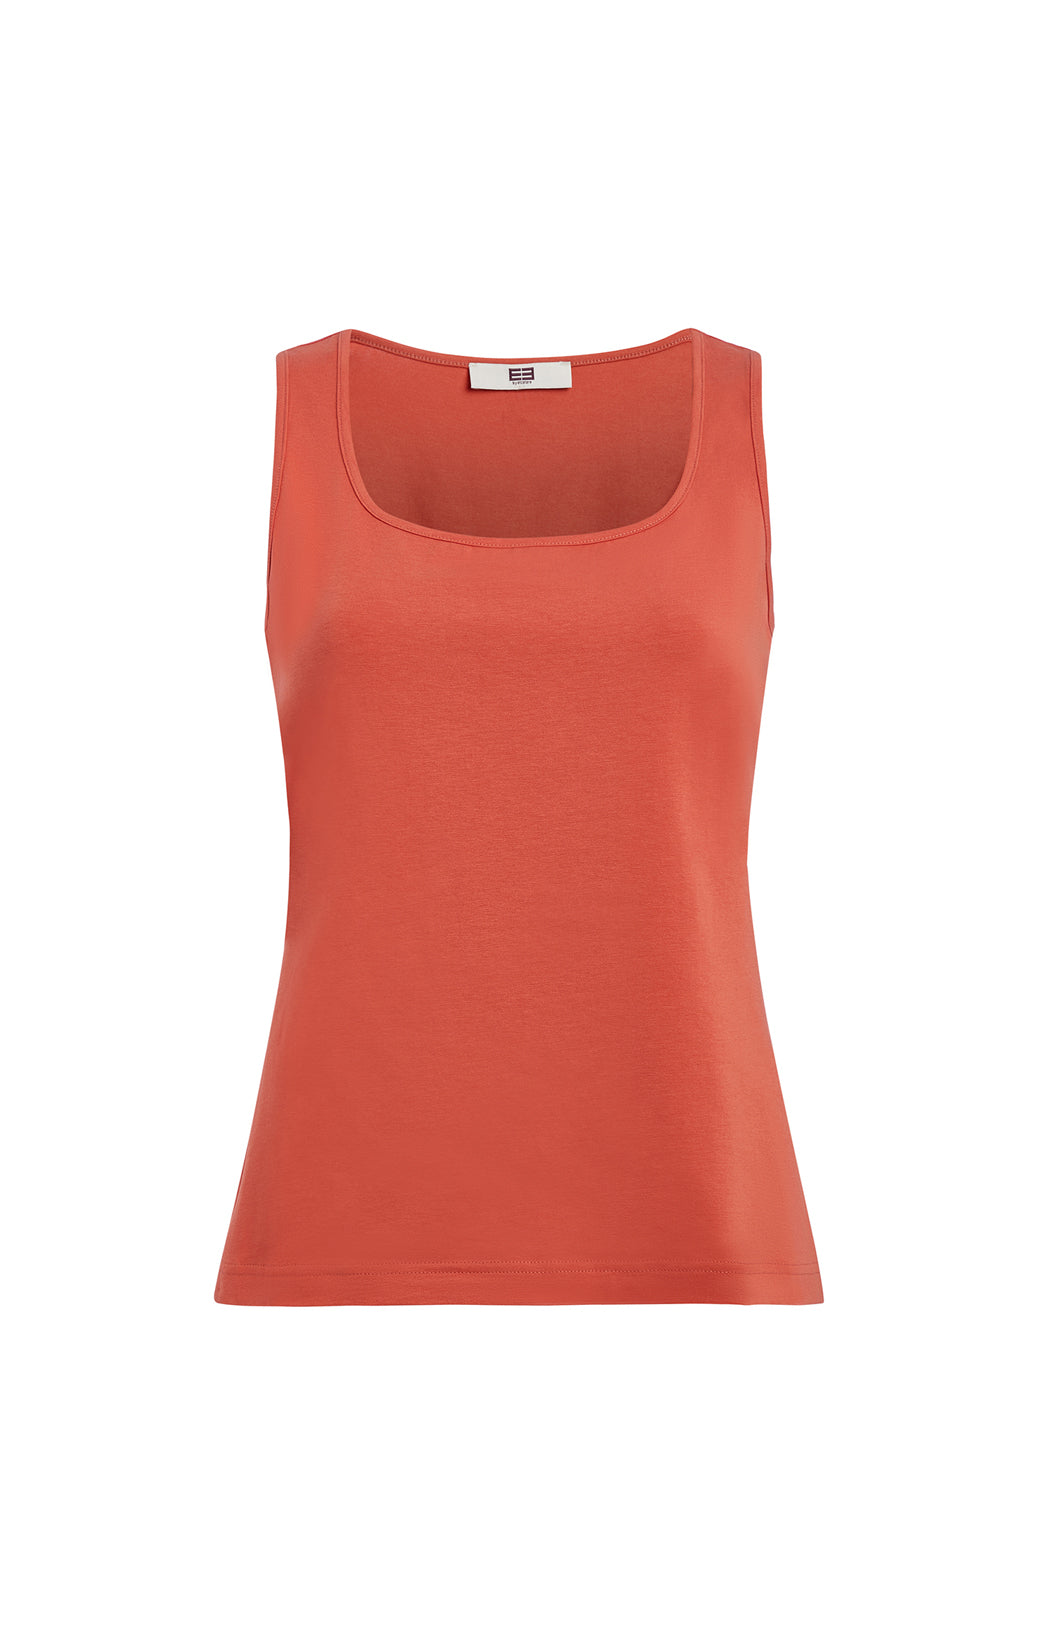 Laguna-Wht - Stretch Jersey Tank Top With Portrait Neck - Product Image